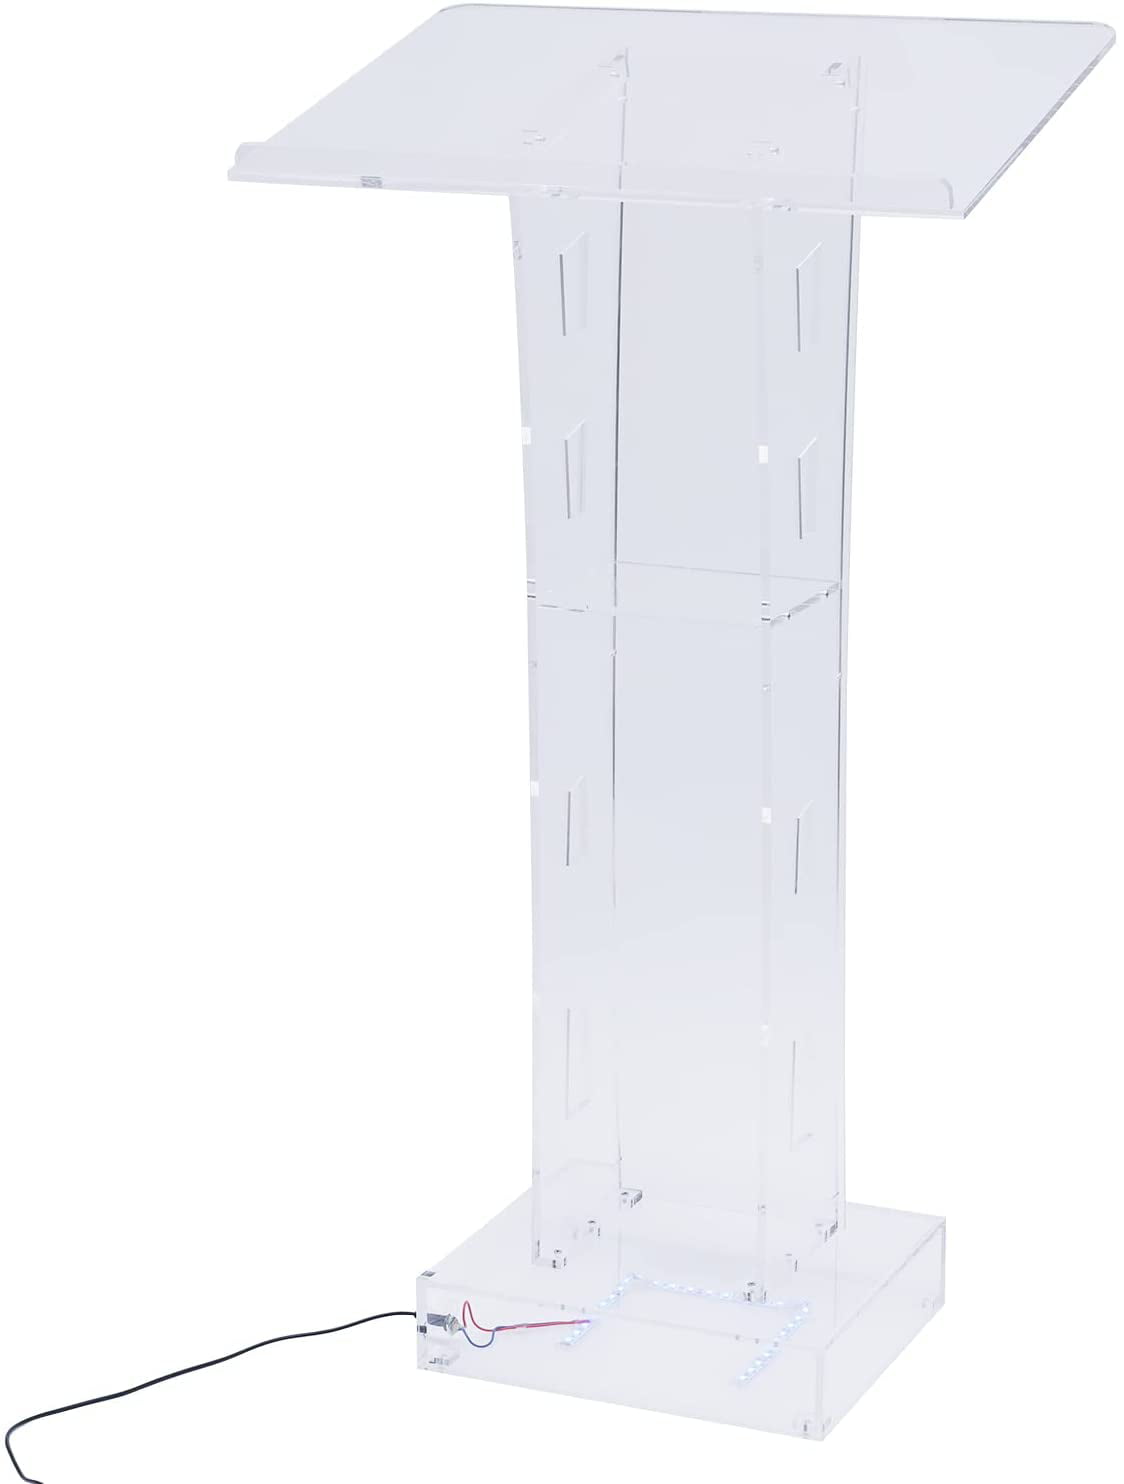 Durable for School Church Embassy Lectern Office Conference Pulpit Meeting Room Display Acrylic Pulpits for Churches Clear Podium Stand Safety Corners & Storage Board 